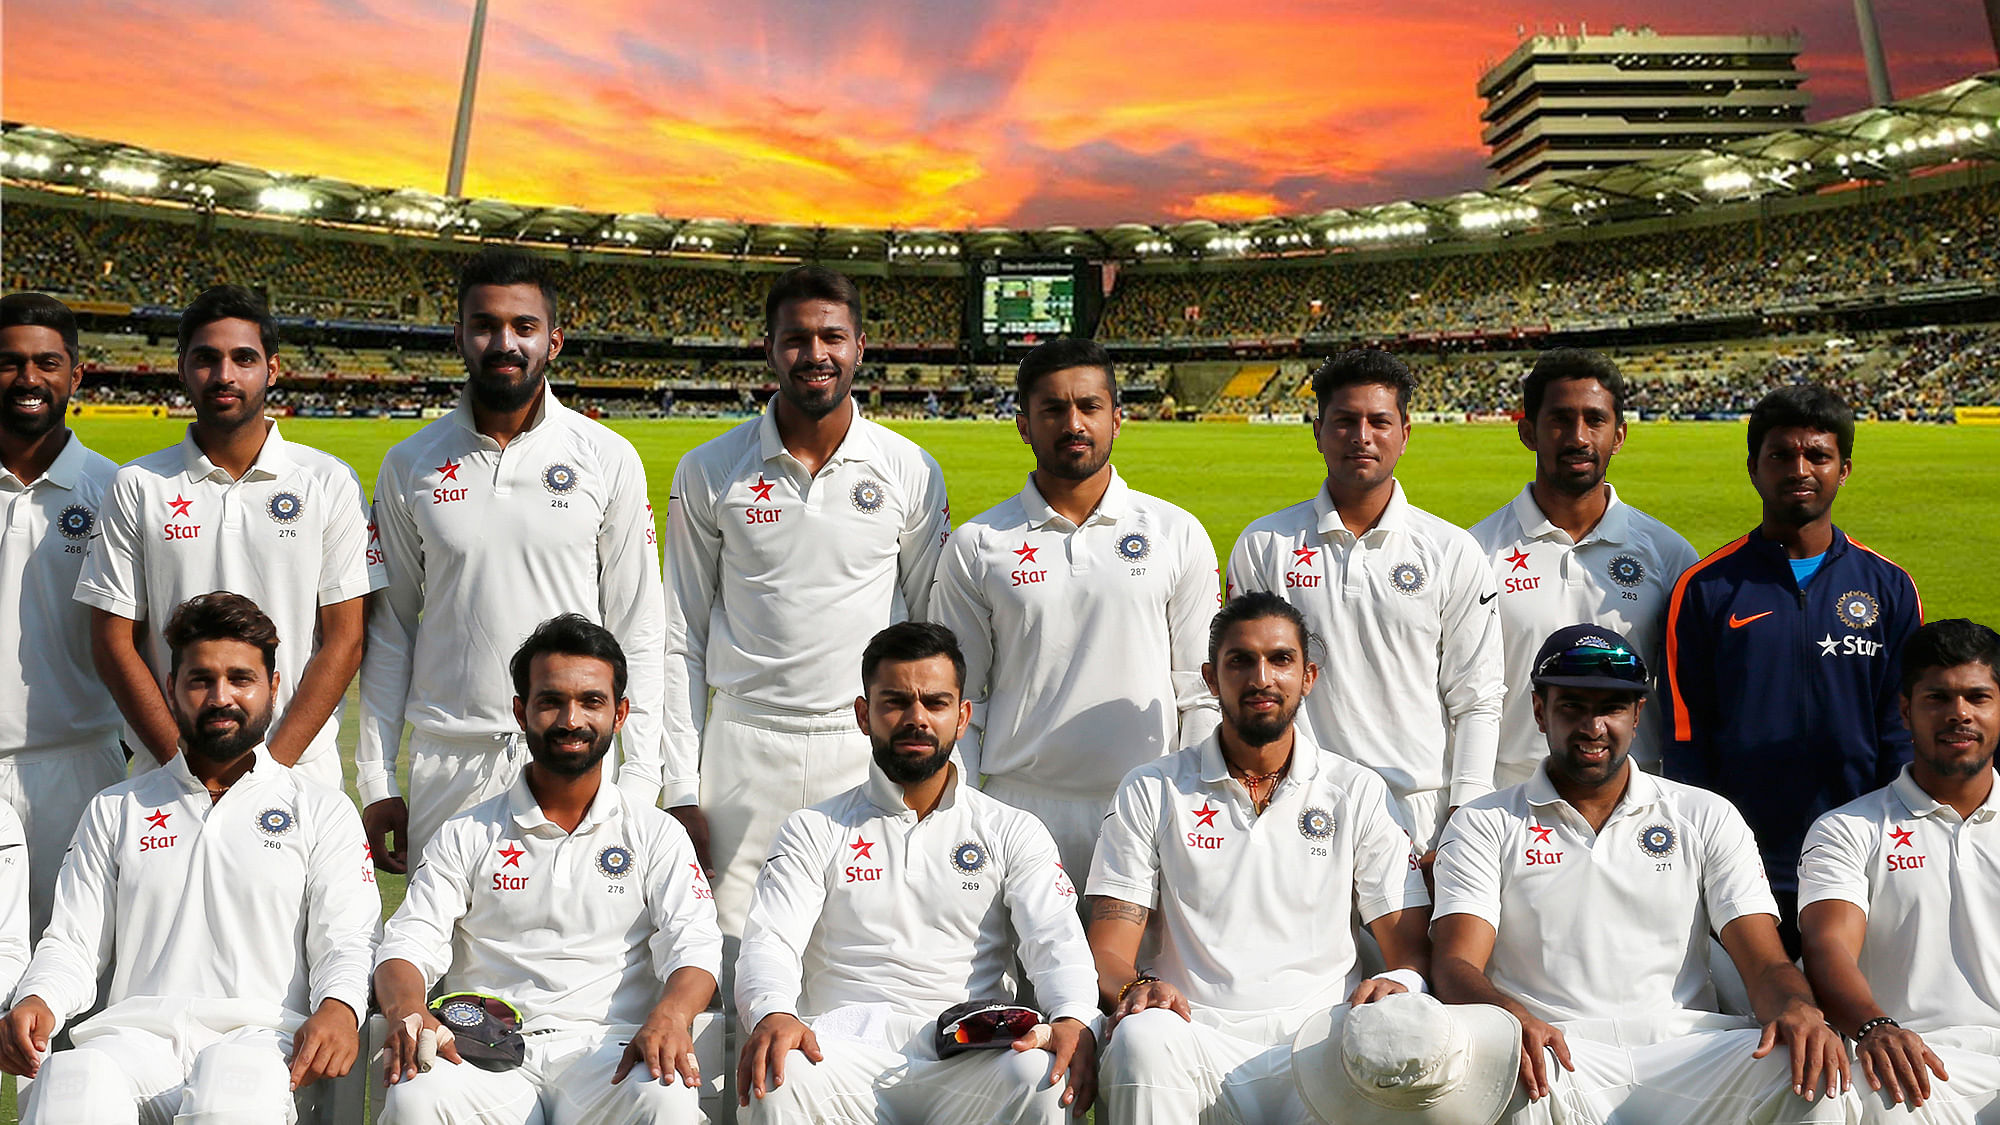 The Indian team that faced Bangladesh in the one-off Test. (Photo: BCCI)